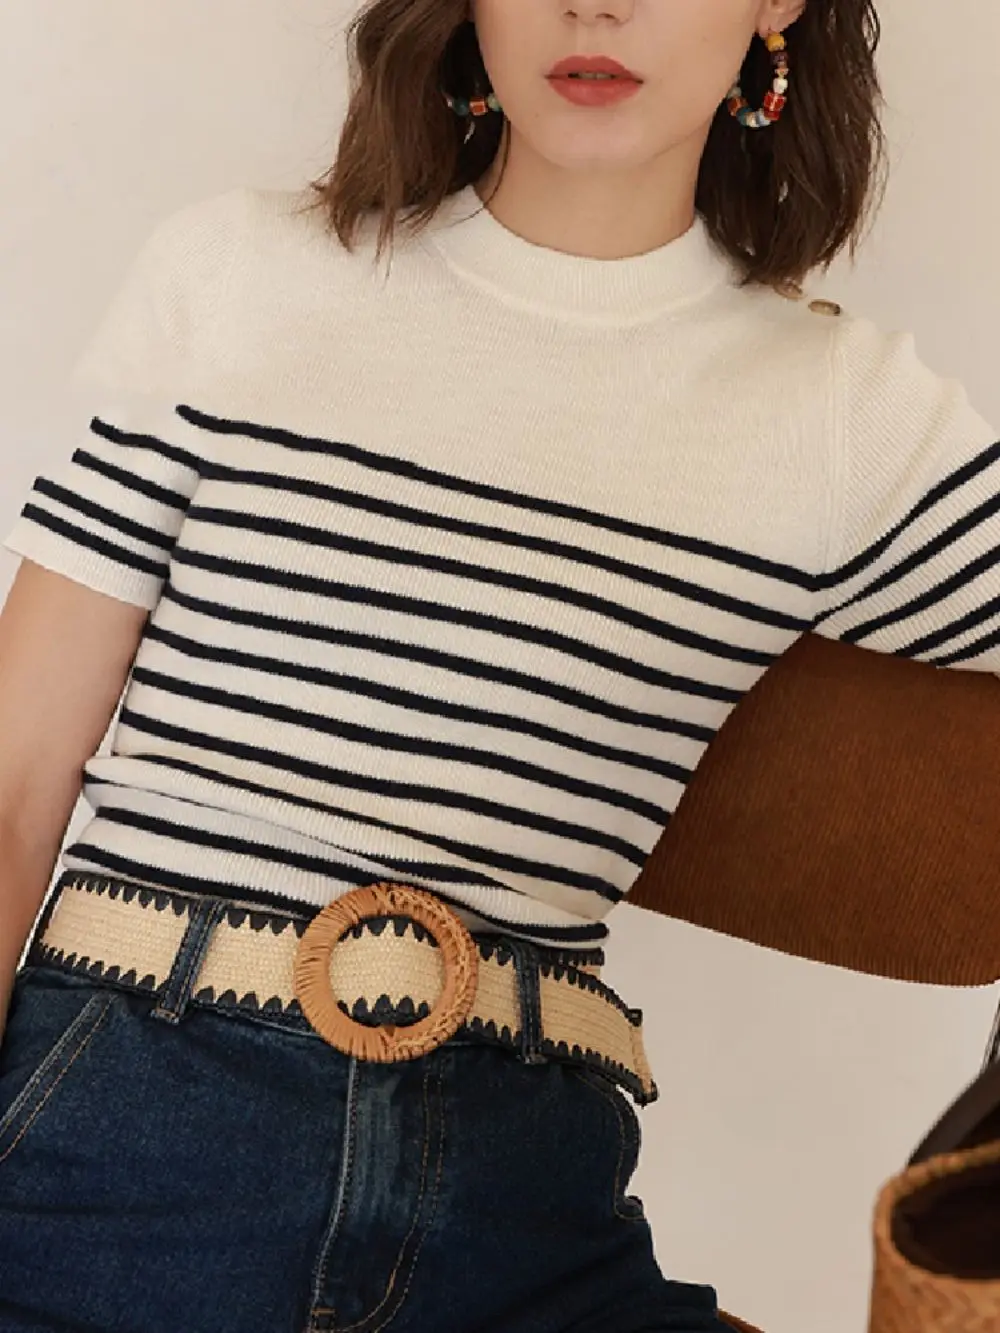 2023 Early Spring New Women Contrast Color Woven Belt Vintage Exquisite Waistband for Ladies All-Match Fashion Decoration